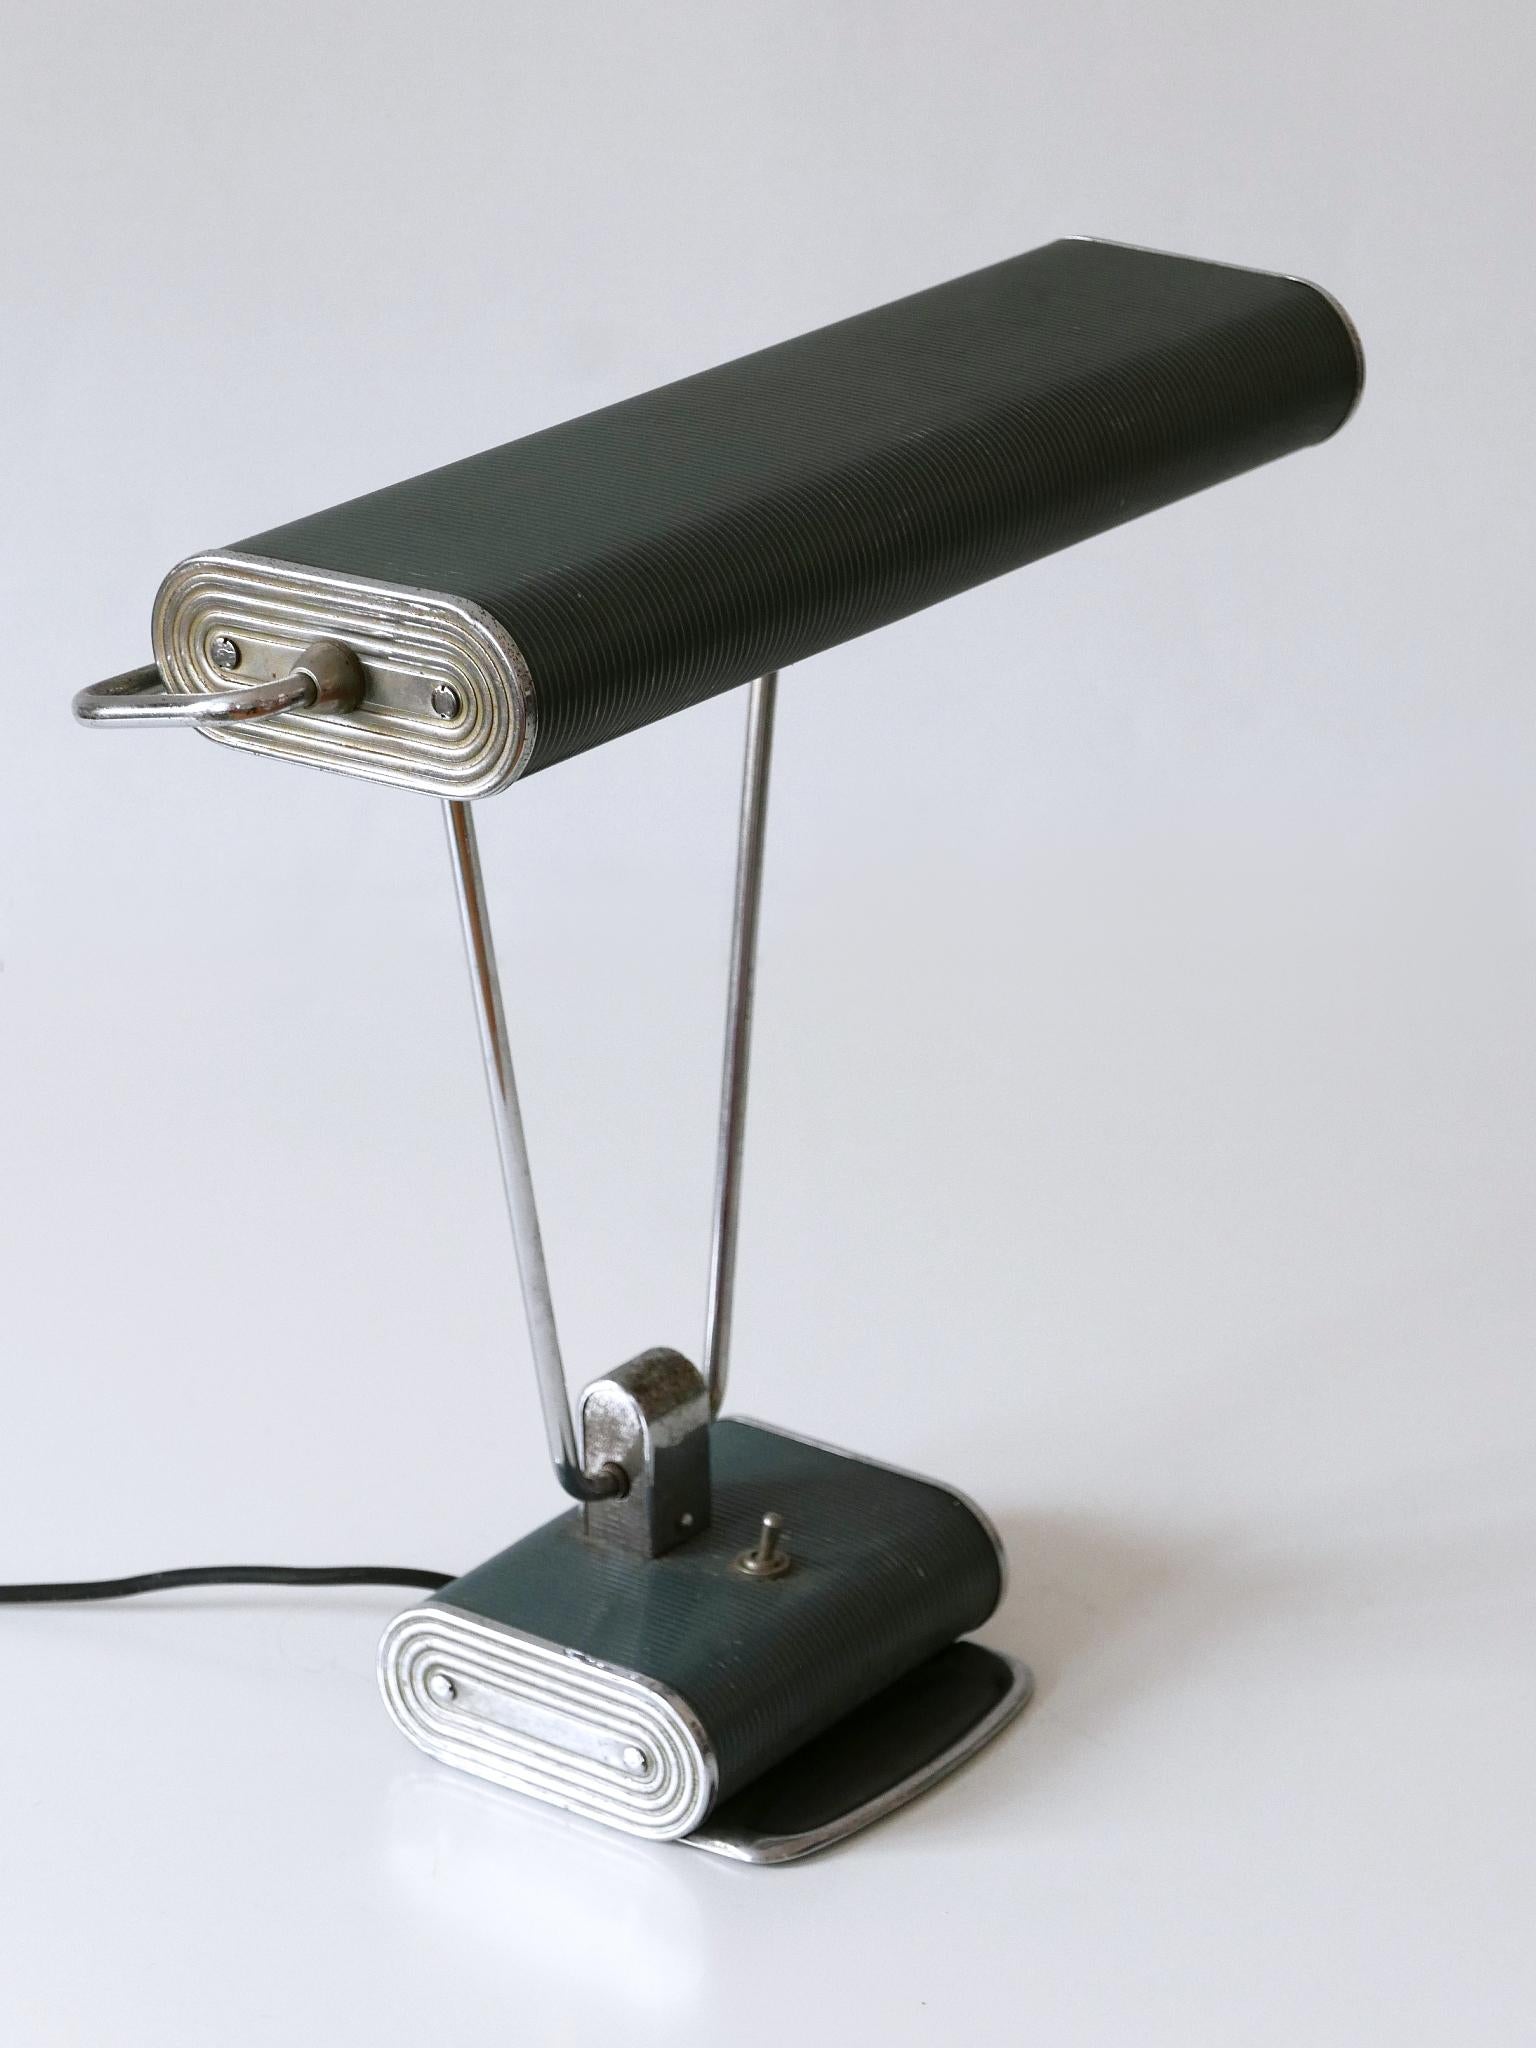 Art Deco Table Lamp or Desk Light 'No 71' by André Mounique for Jumo 1930s For Sale 7